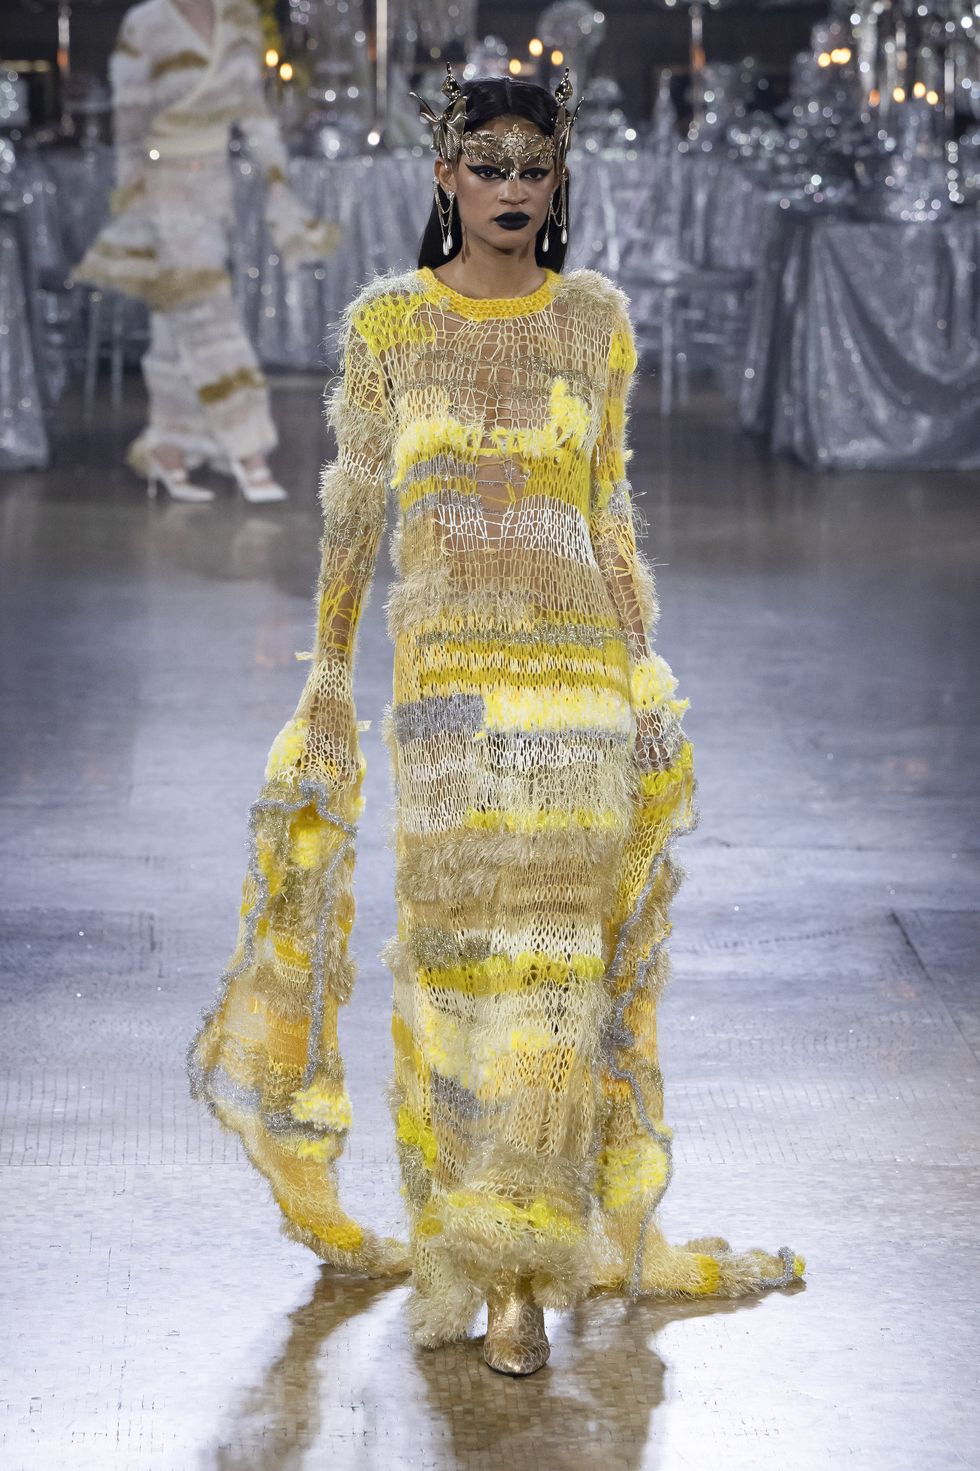 new york, usa february 10 a model walks the runway during the rodarte ready to wear fallwinter 2023 2024 fashion show as part of the new york fashion week on february 10, 2023 in ny photo by victor virgilegamma rapho via getty images